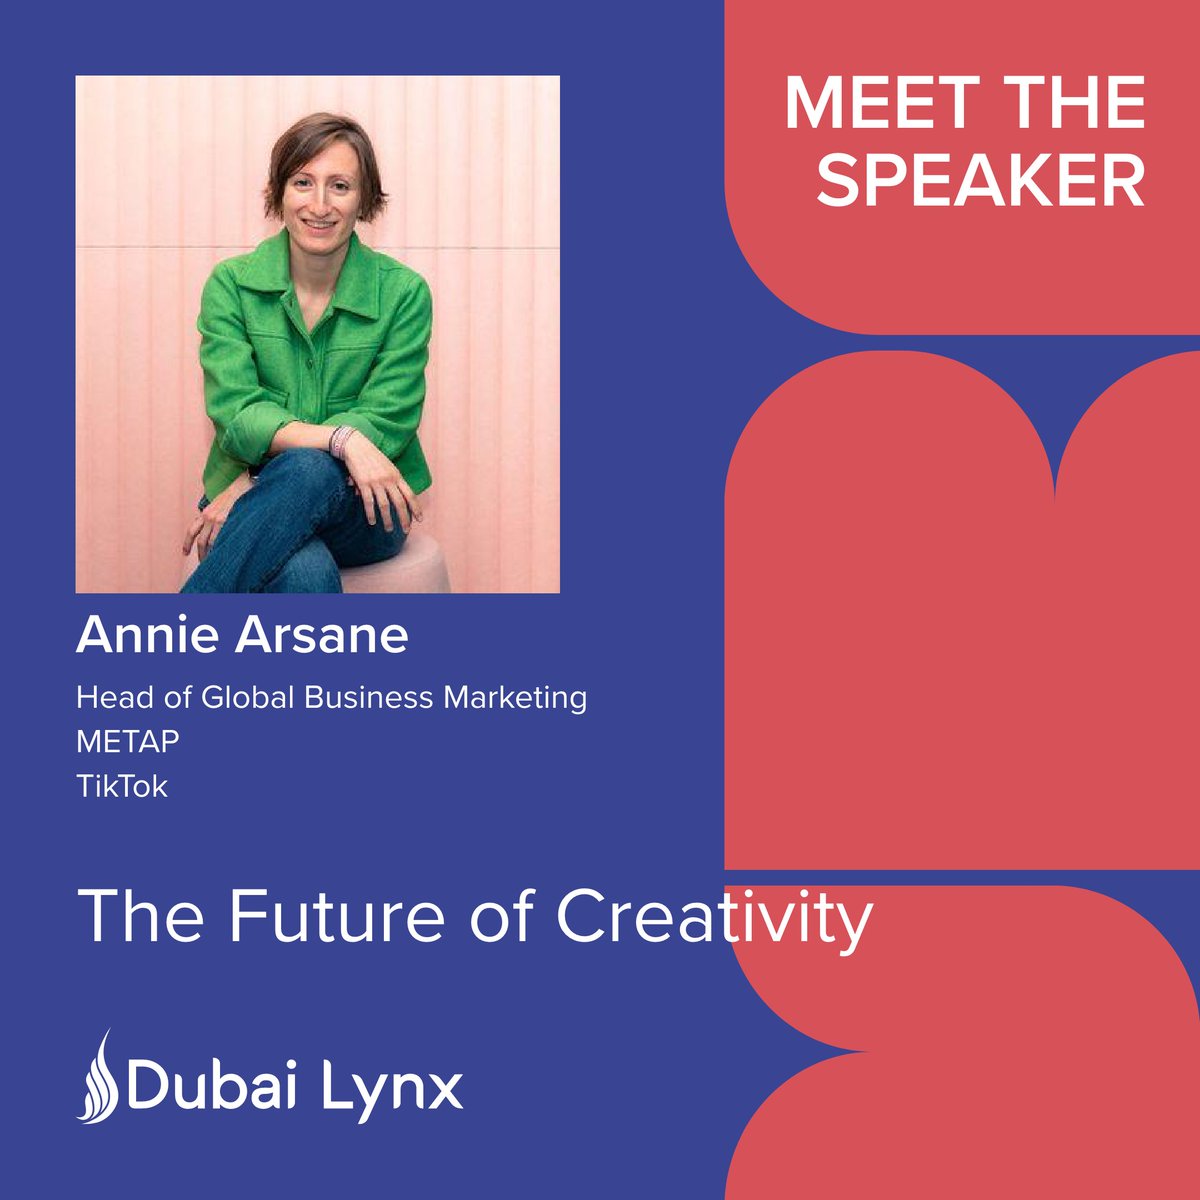 Join this session to explore how brands can move from interrupting the day-to-day of consumers to becoming part of their most valuable time. Annie Arsane, Head of Global Business Marketing - METAP at TikTok leads this keynote session Buy your pass today bit.ly/3YXMr6B